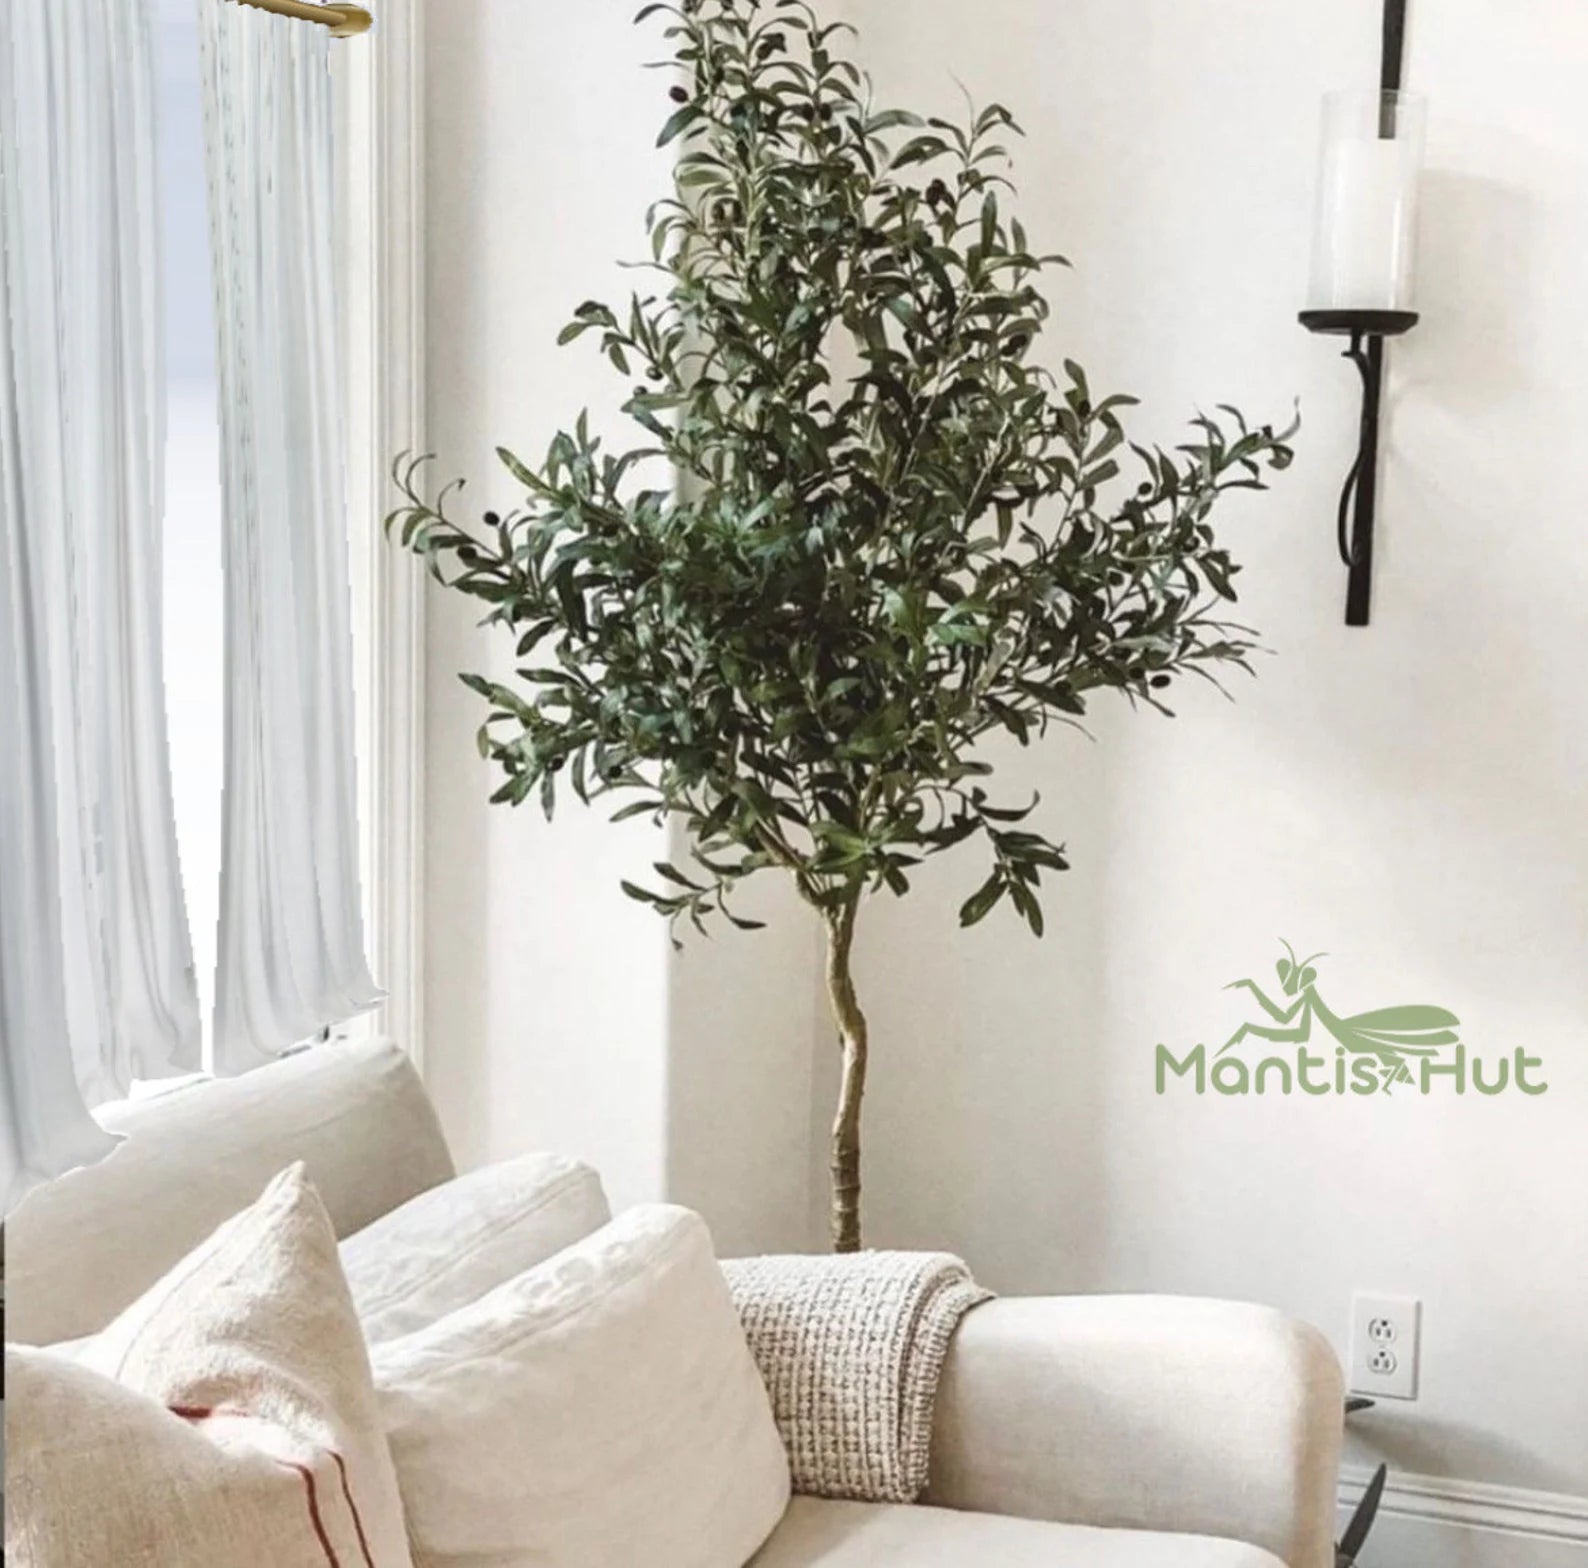 olive tree artificial, artificial olive trees, artificial olive tree, fake  olive trees, faux olive tree, silk olive tree